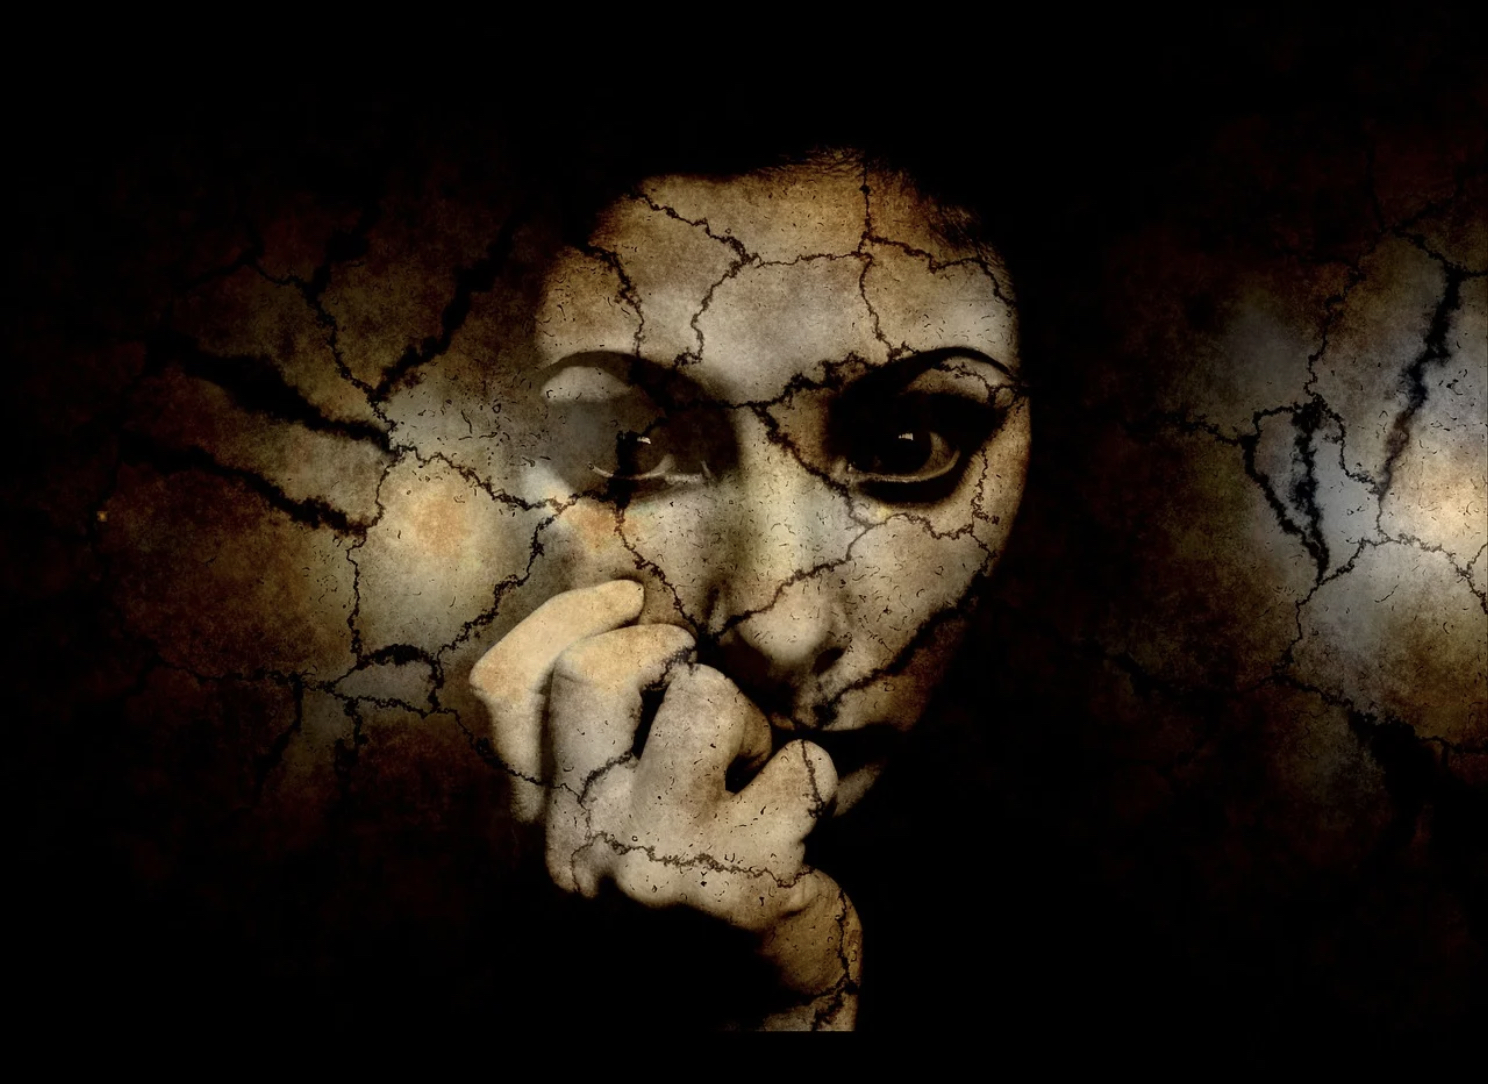 A woman's face, cracked and broken.